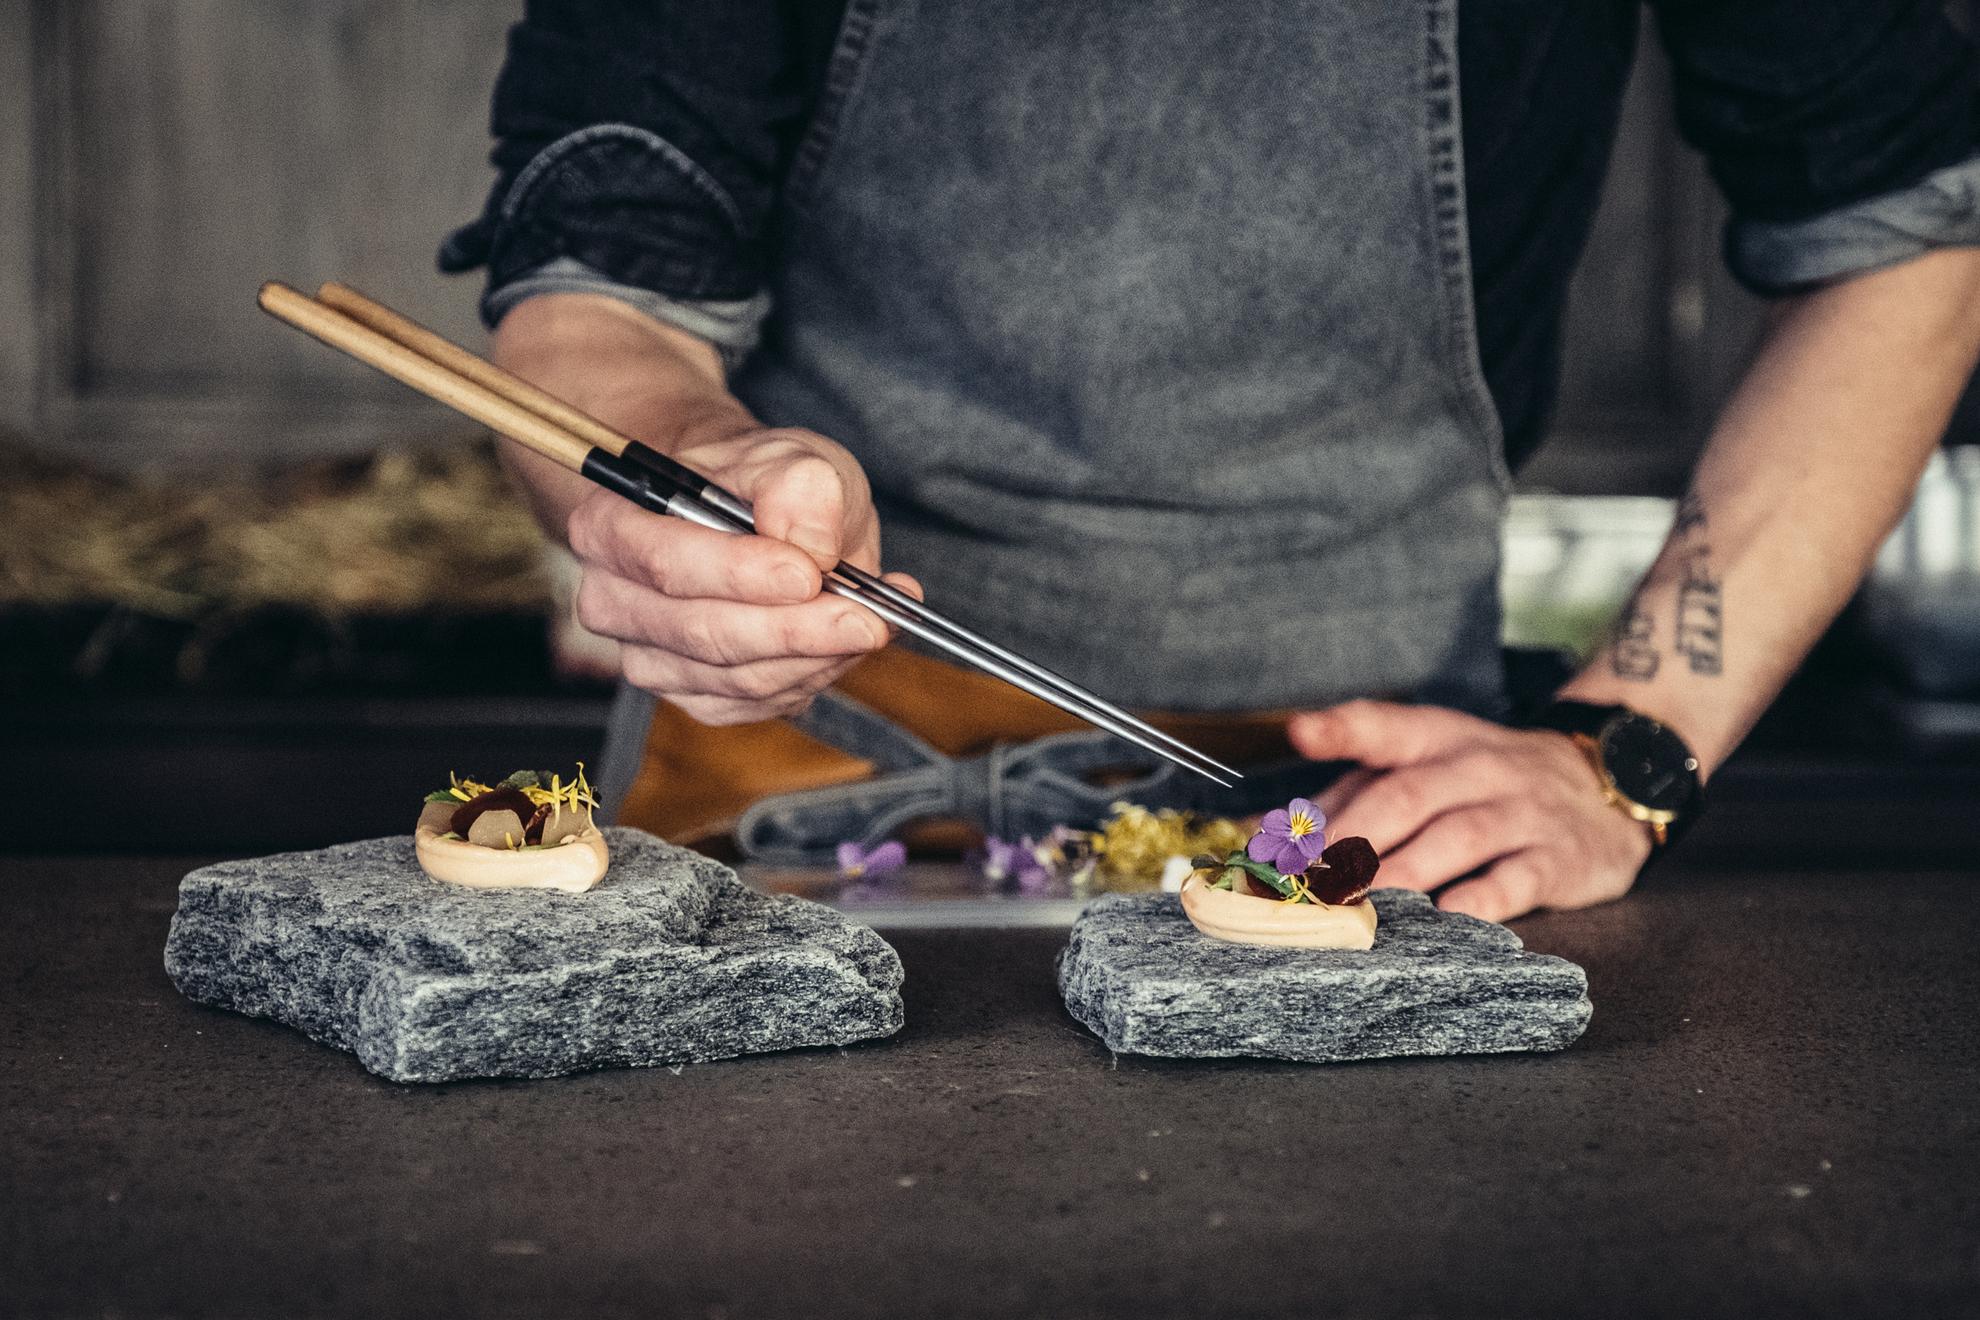 A person is plating food with a long tweezer. It's served on granite rocks and decorated with edible flowers.